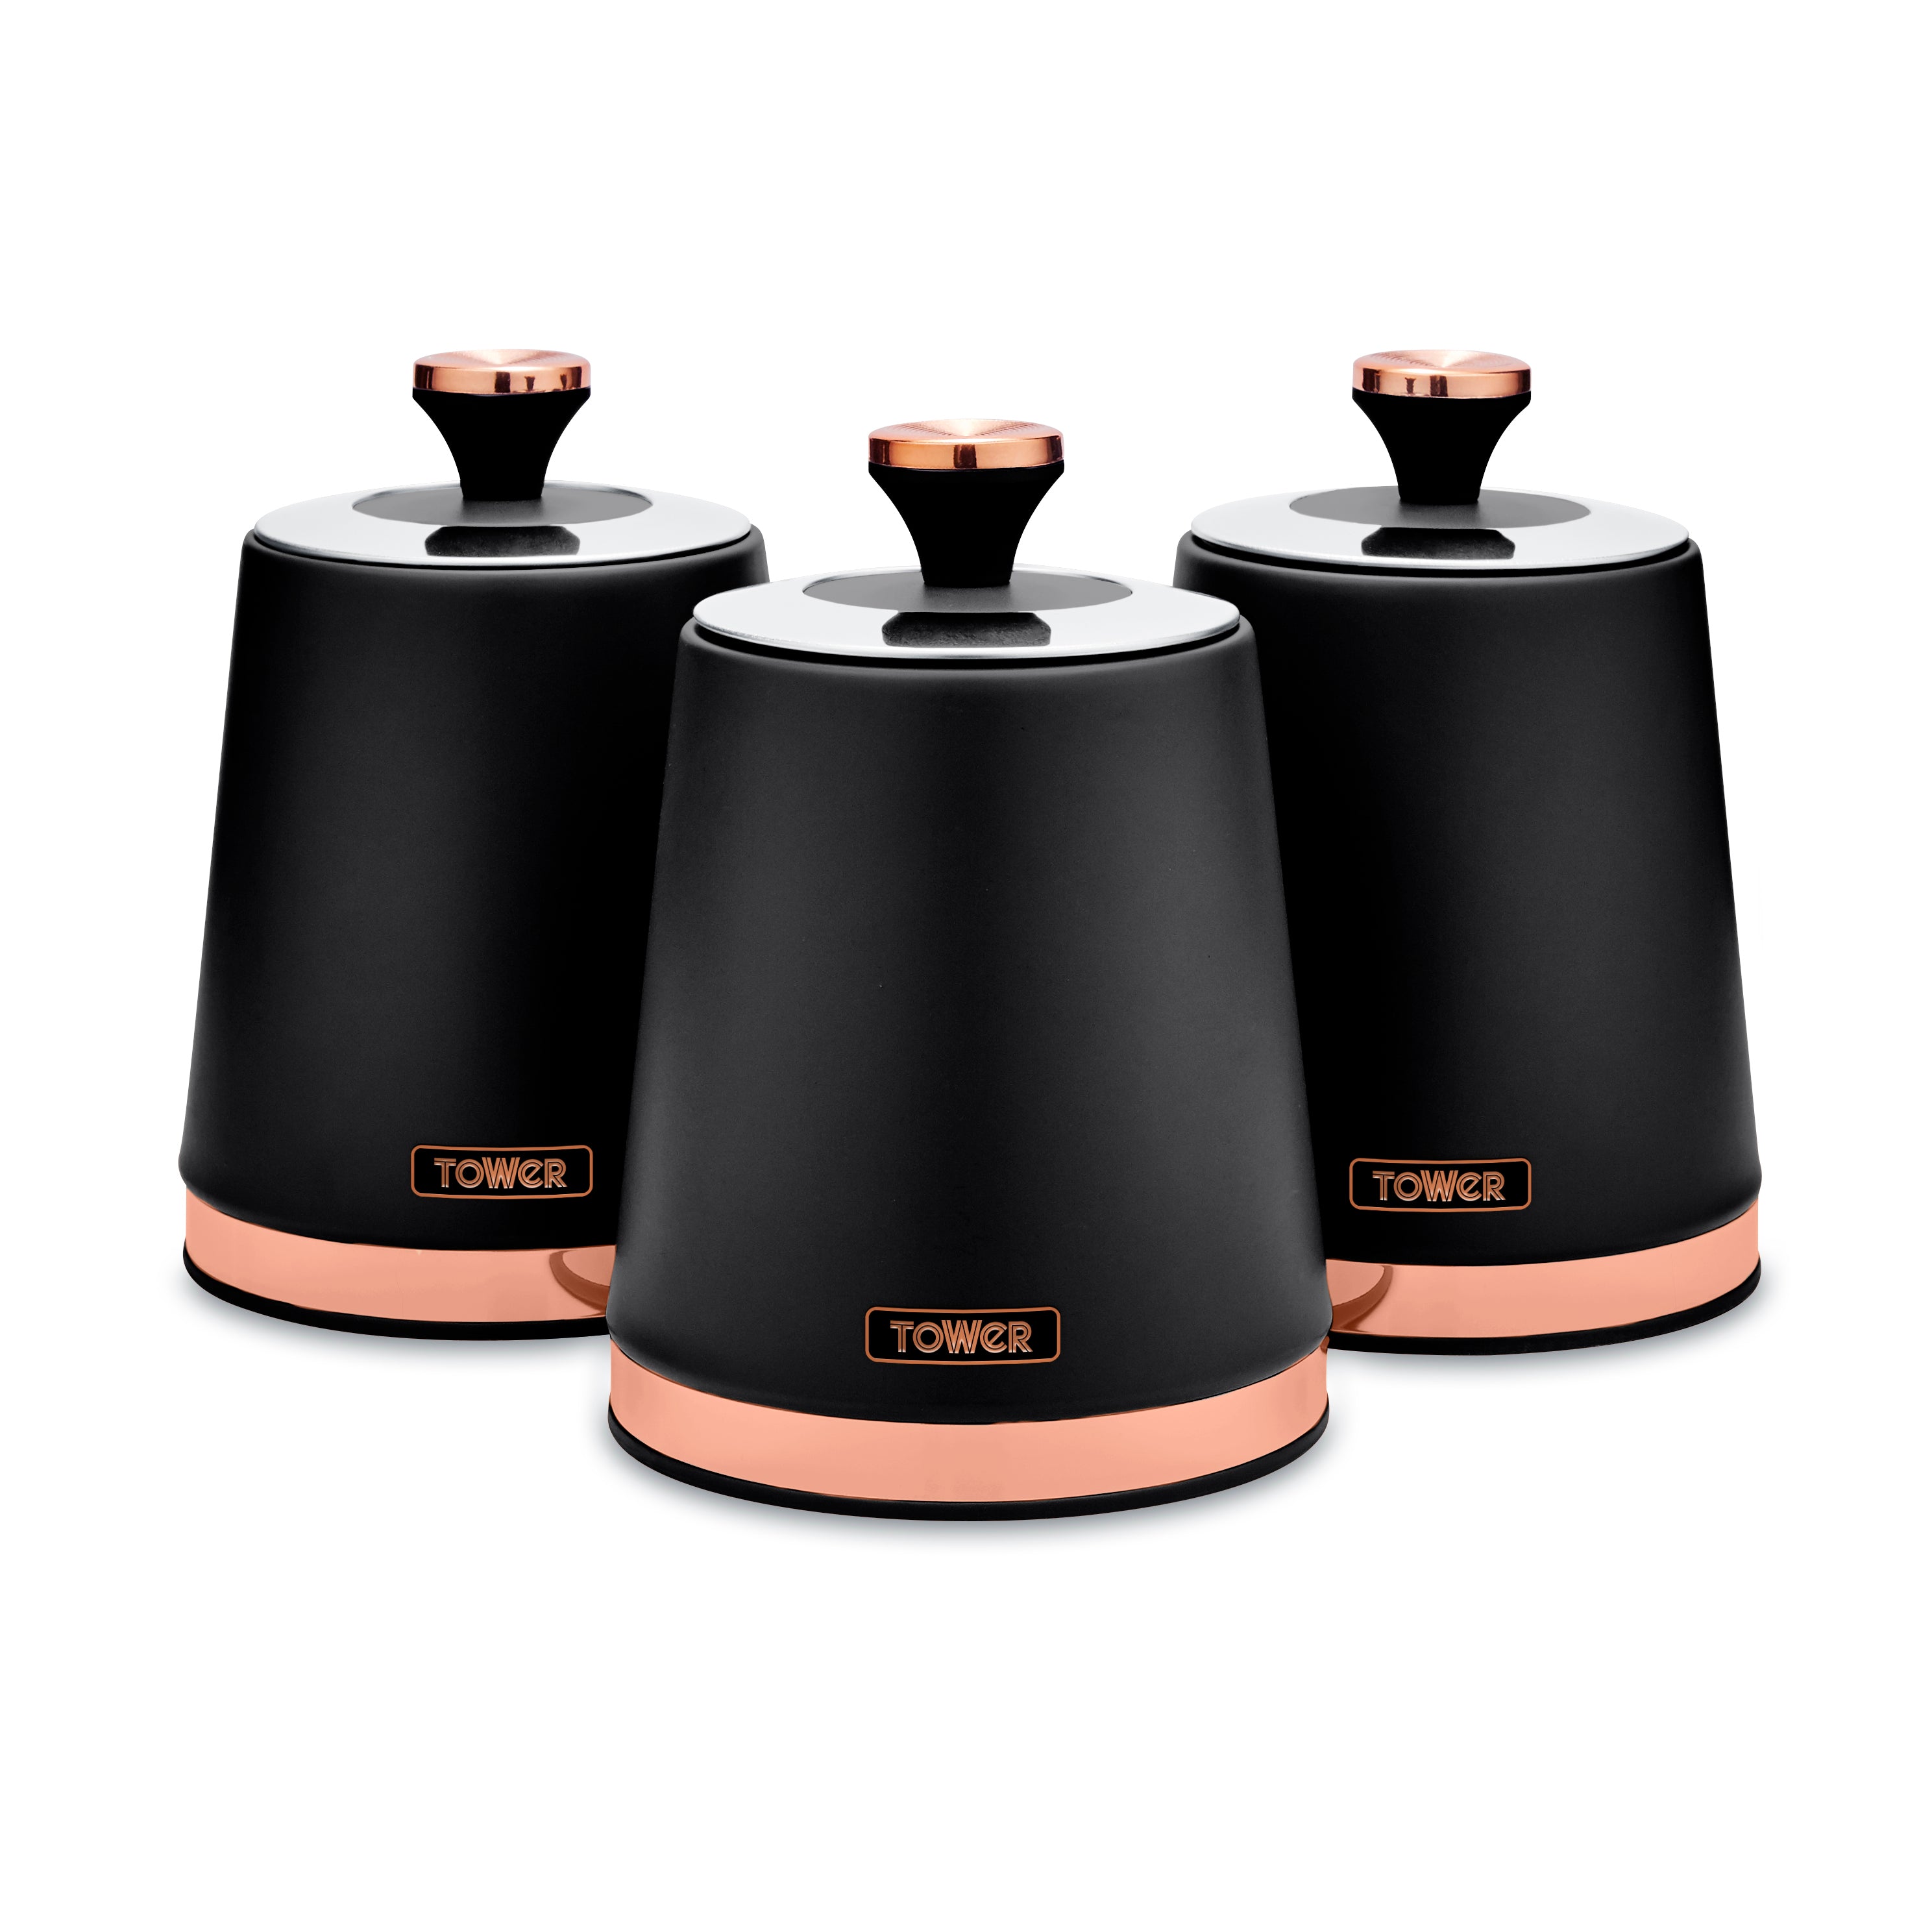 Tower Cavaletto Set of 3 Canisters - Black